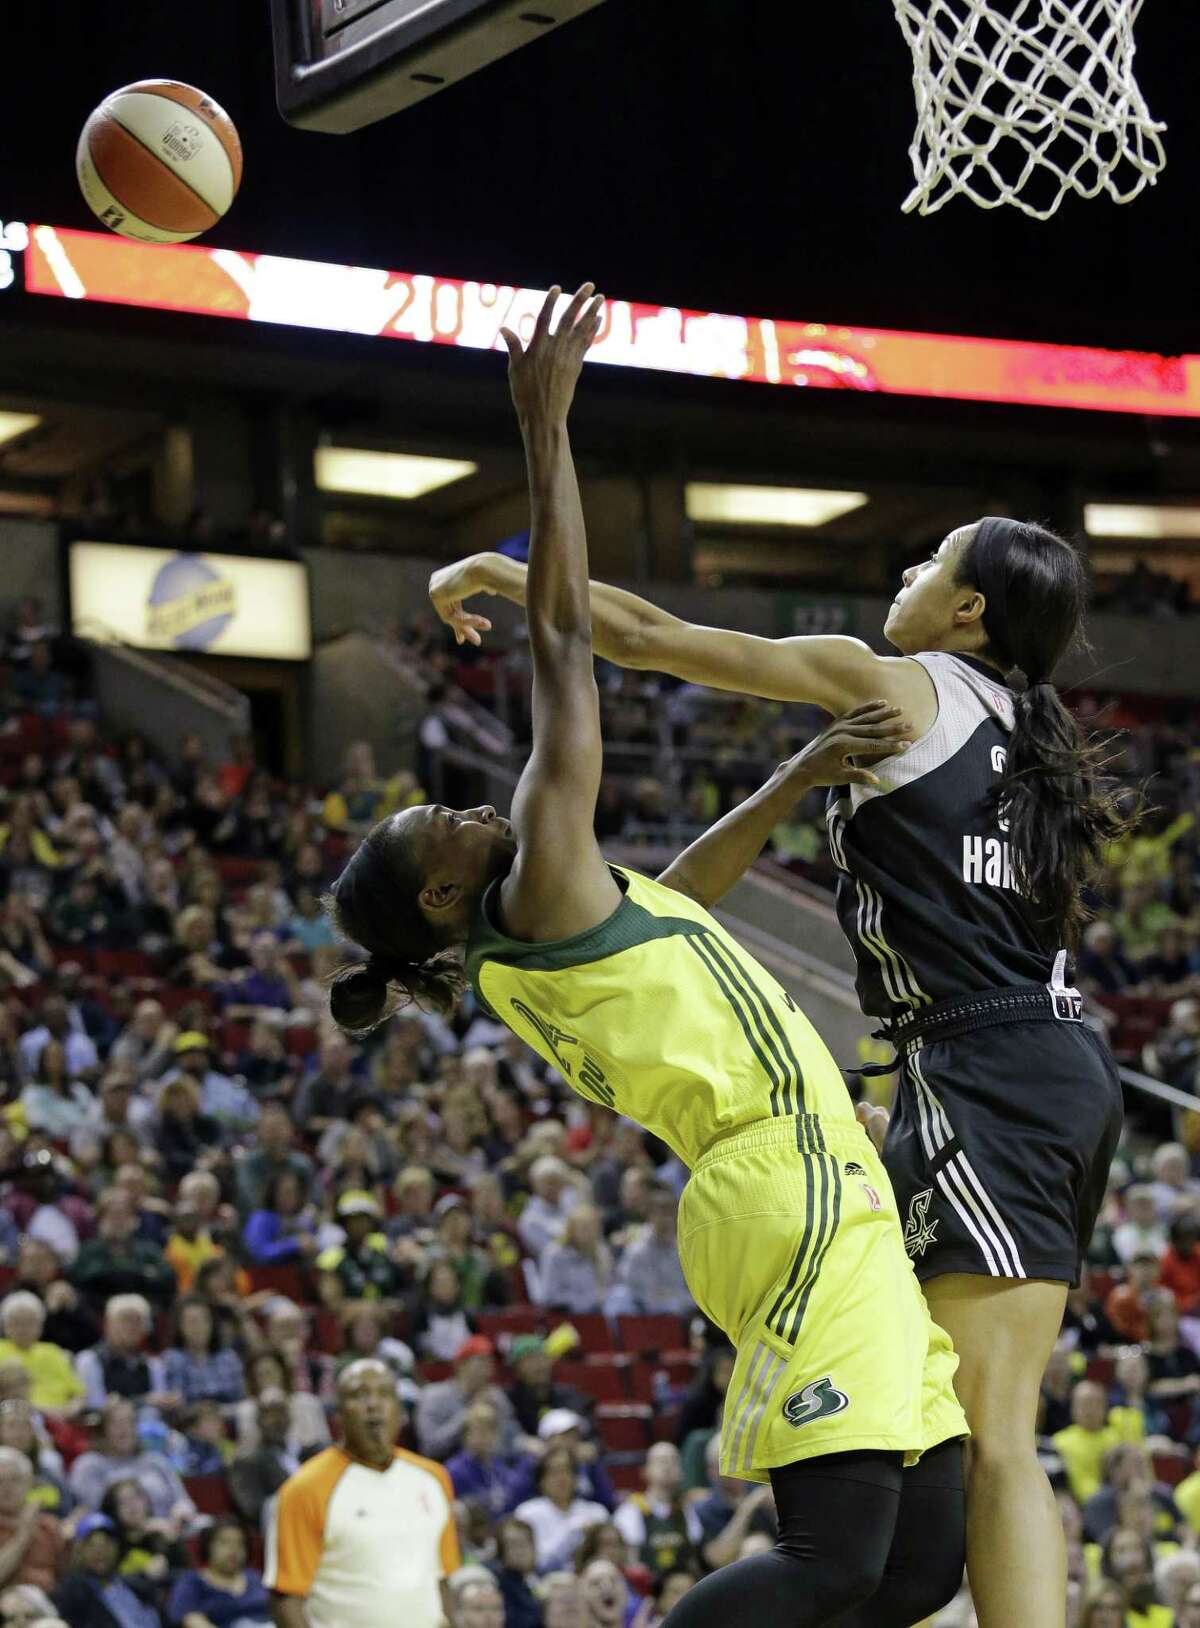 San Antonio Stars' Isabelle Harrison, right, blocks a shot by Seattle Storm's Jewell Loyd in the first half of a WNBA basketball game Sunday, June 18, 2017, in Seattle. (AP Photo/Elaine Thompson)